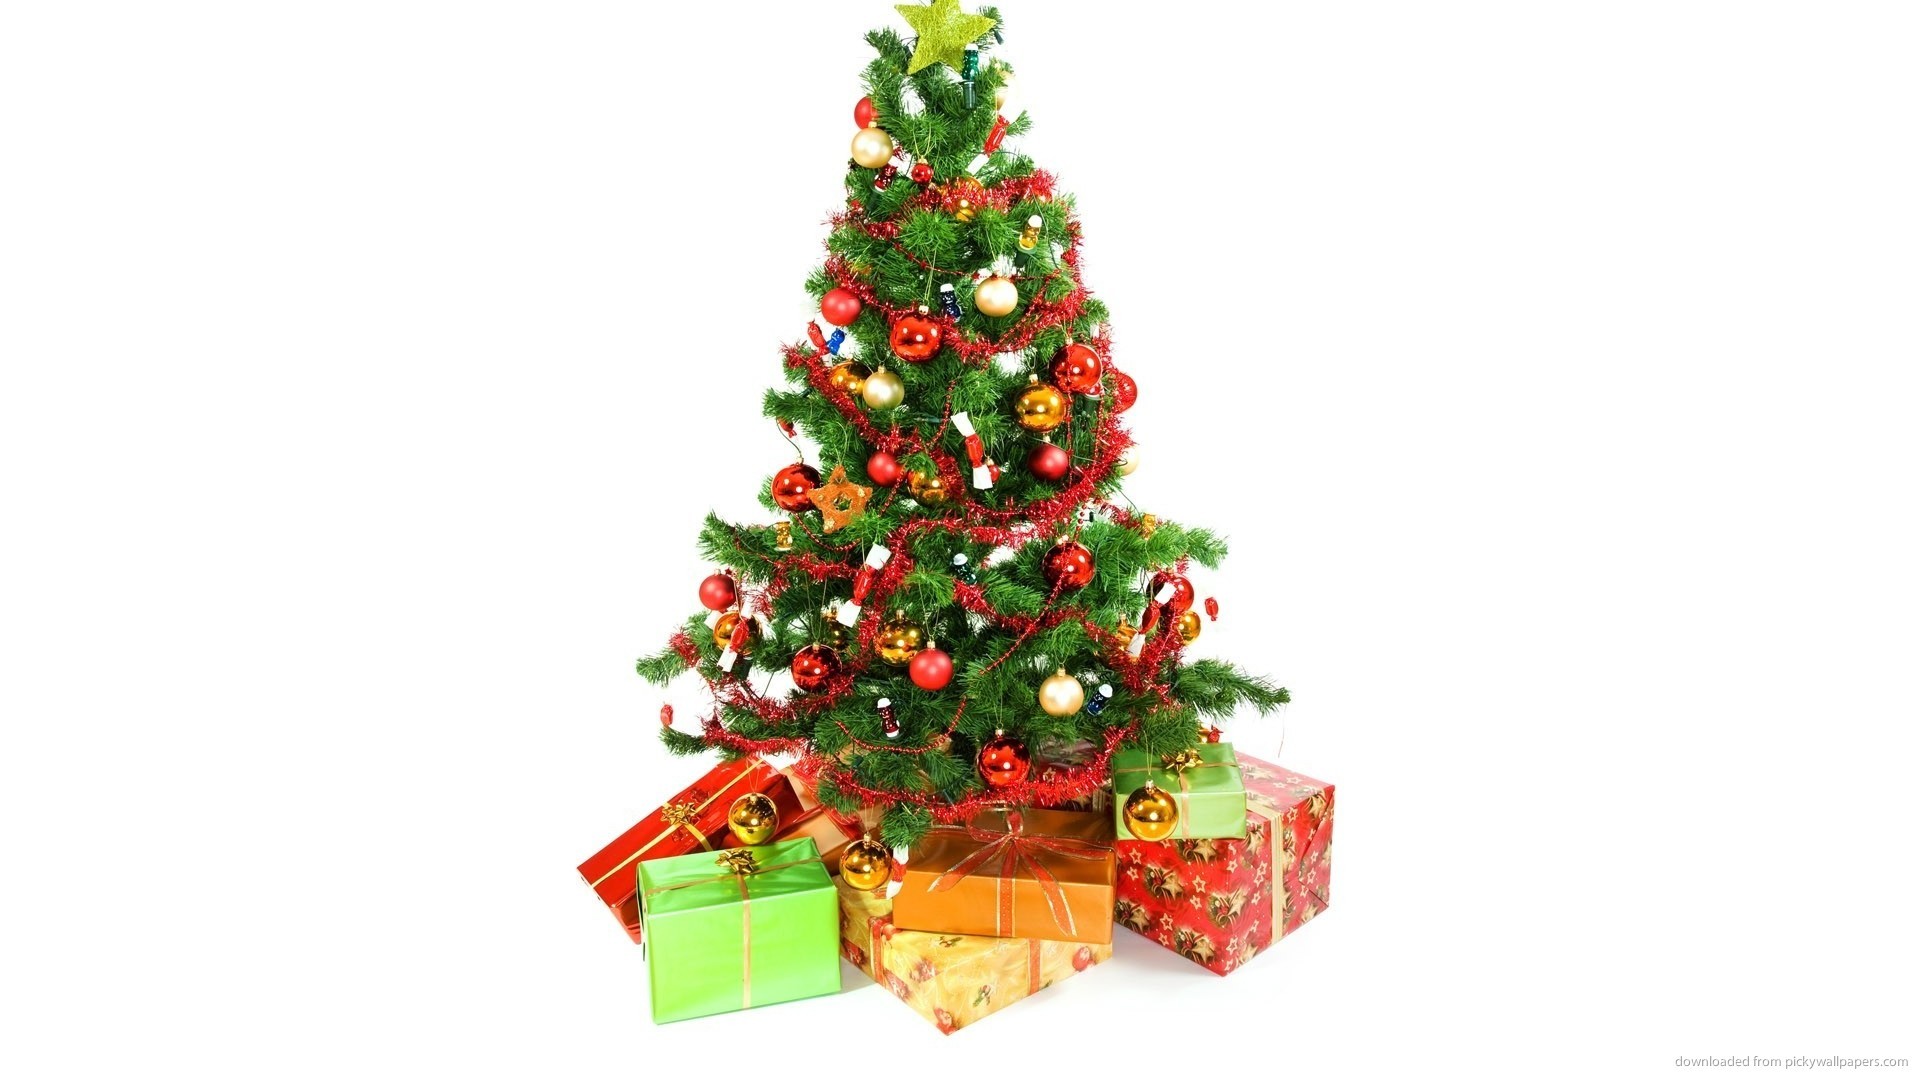 1920x1080 christmas tree background wallpaper ; christmas-tree -with-presents-underneath-on